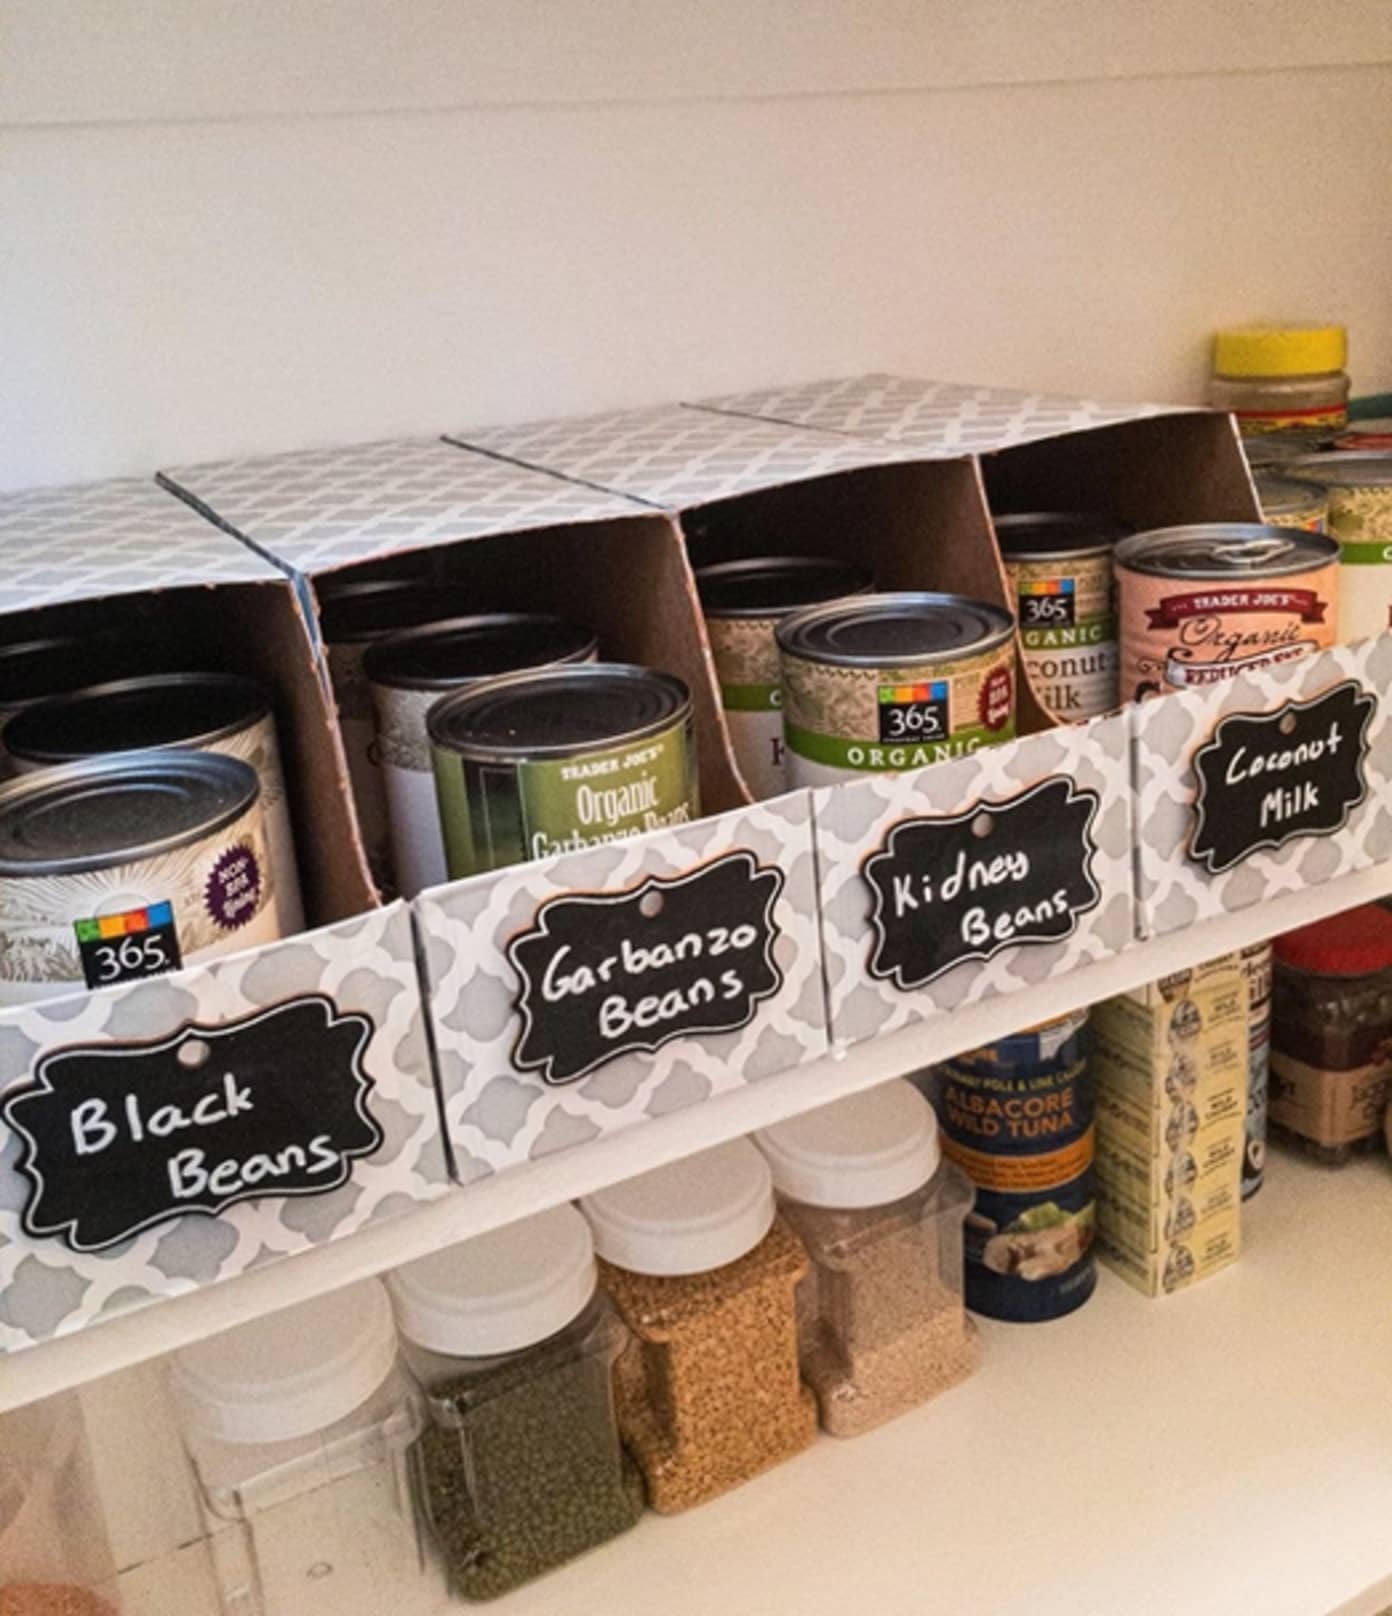 Pantry Organization - DIY Storage Containers from Cardboard Boxes